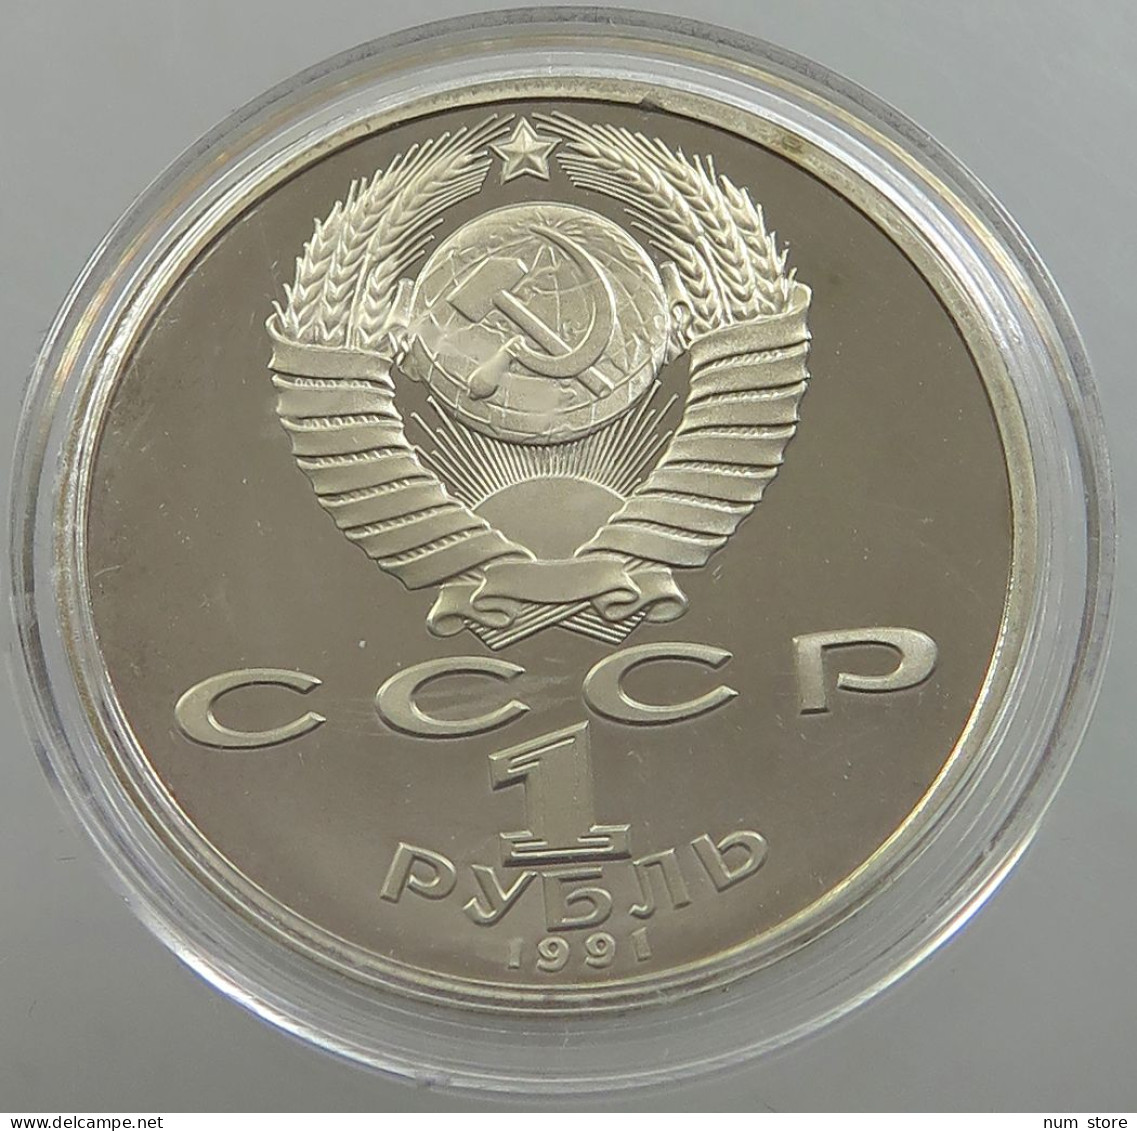 RUSSIA USSR ROUBLE 1991 NAVOI PROOF #sm14 0131 - Russia